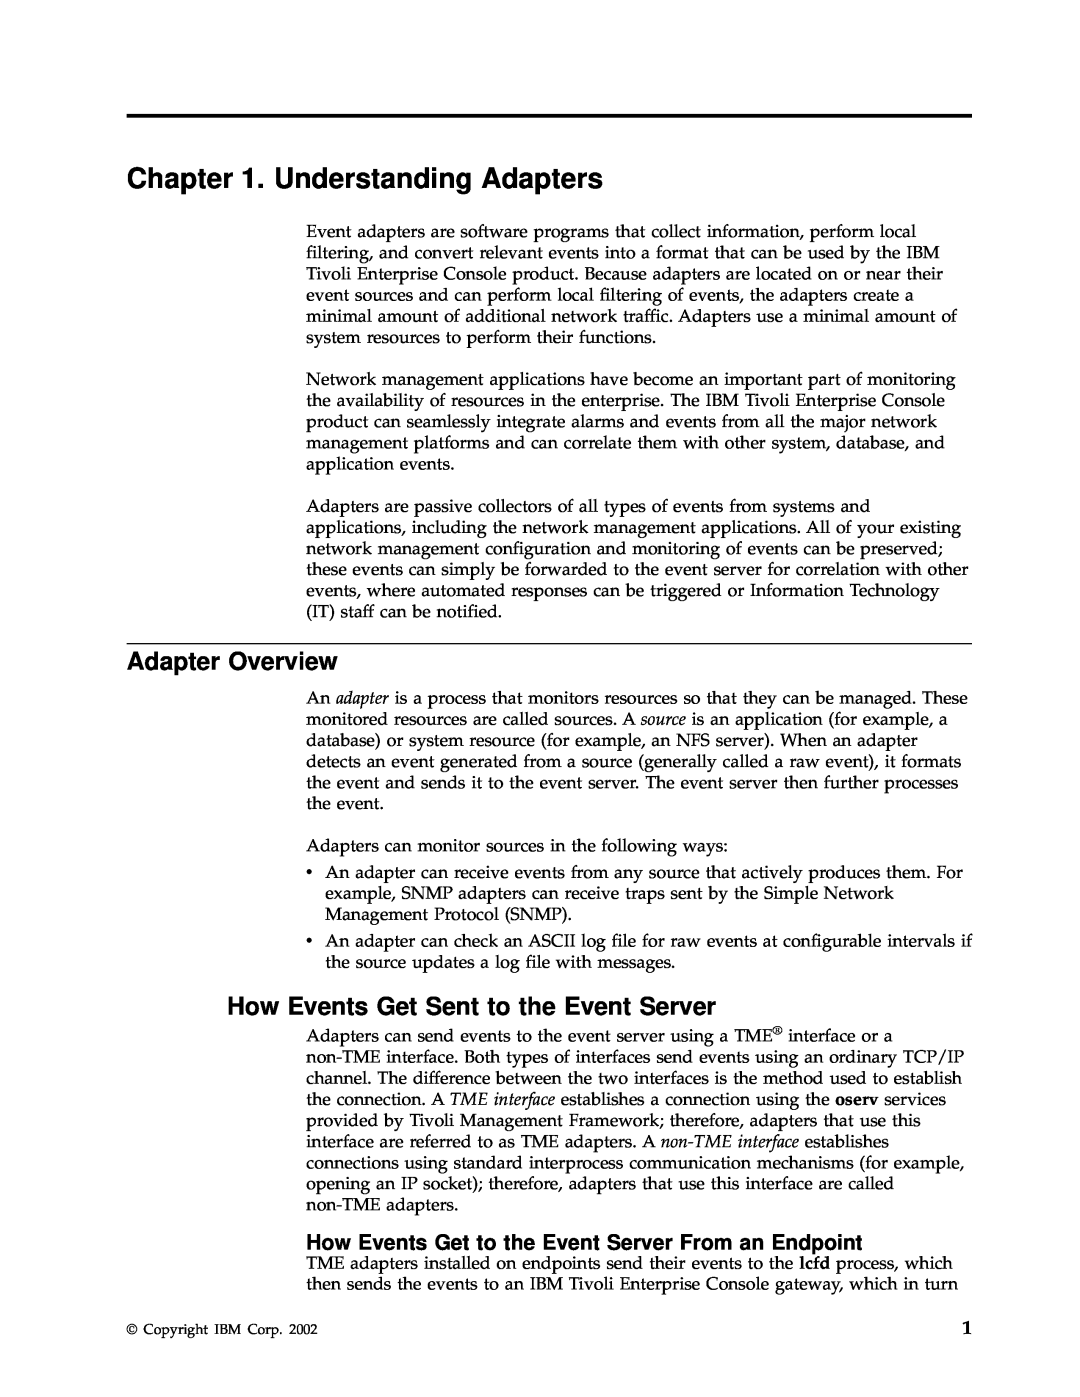 IBM Enterprise Console manual Understanding Adapters, Adapter Overview, How Events Get Sent to the Event Server 